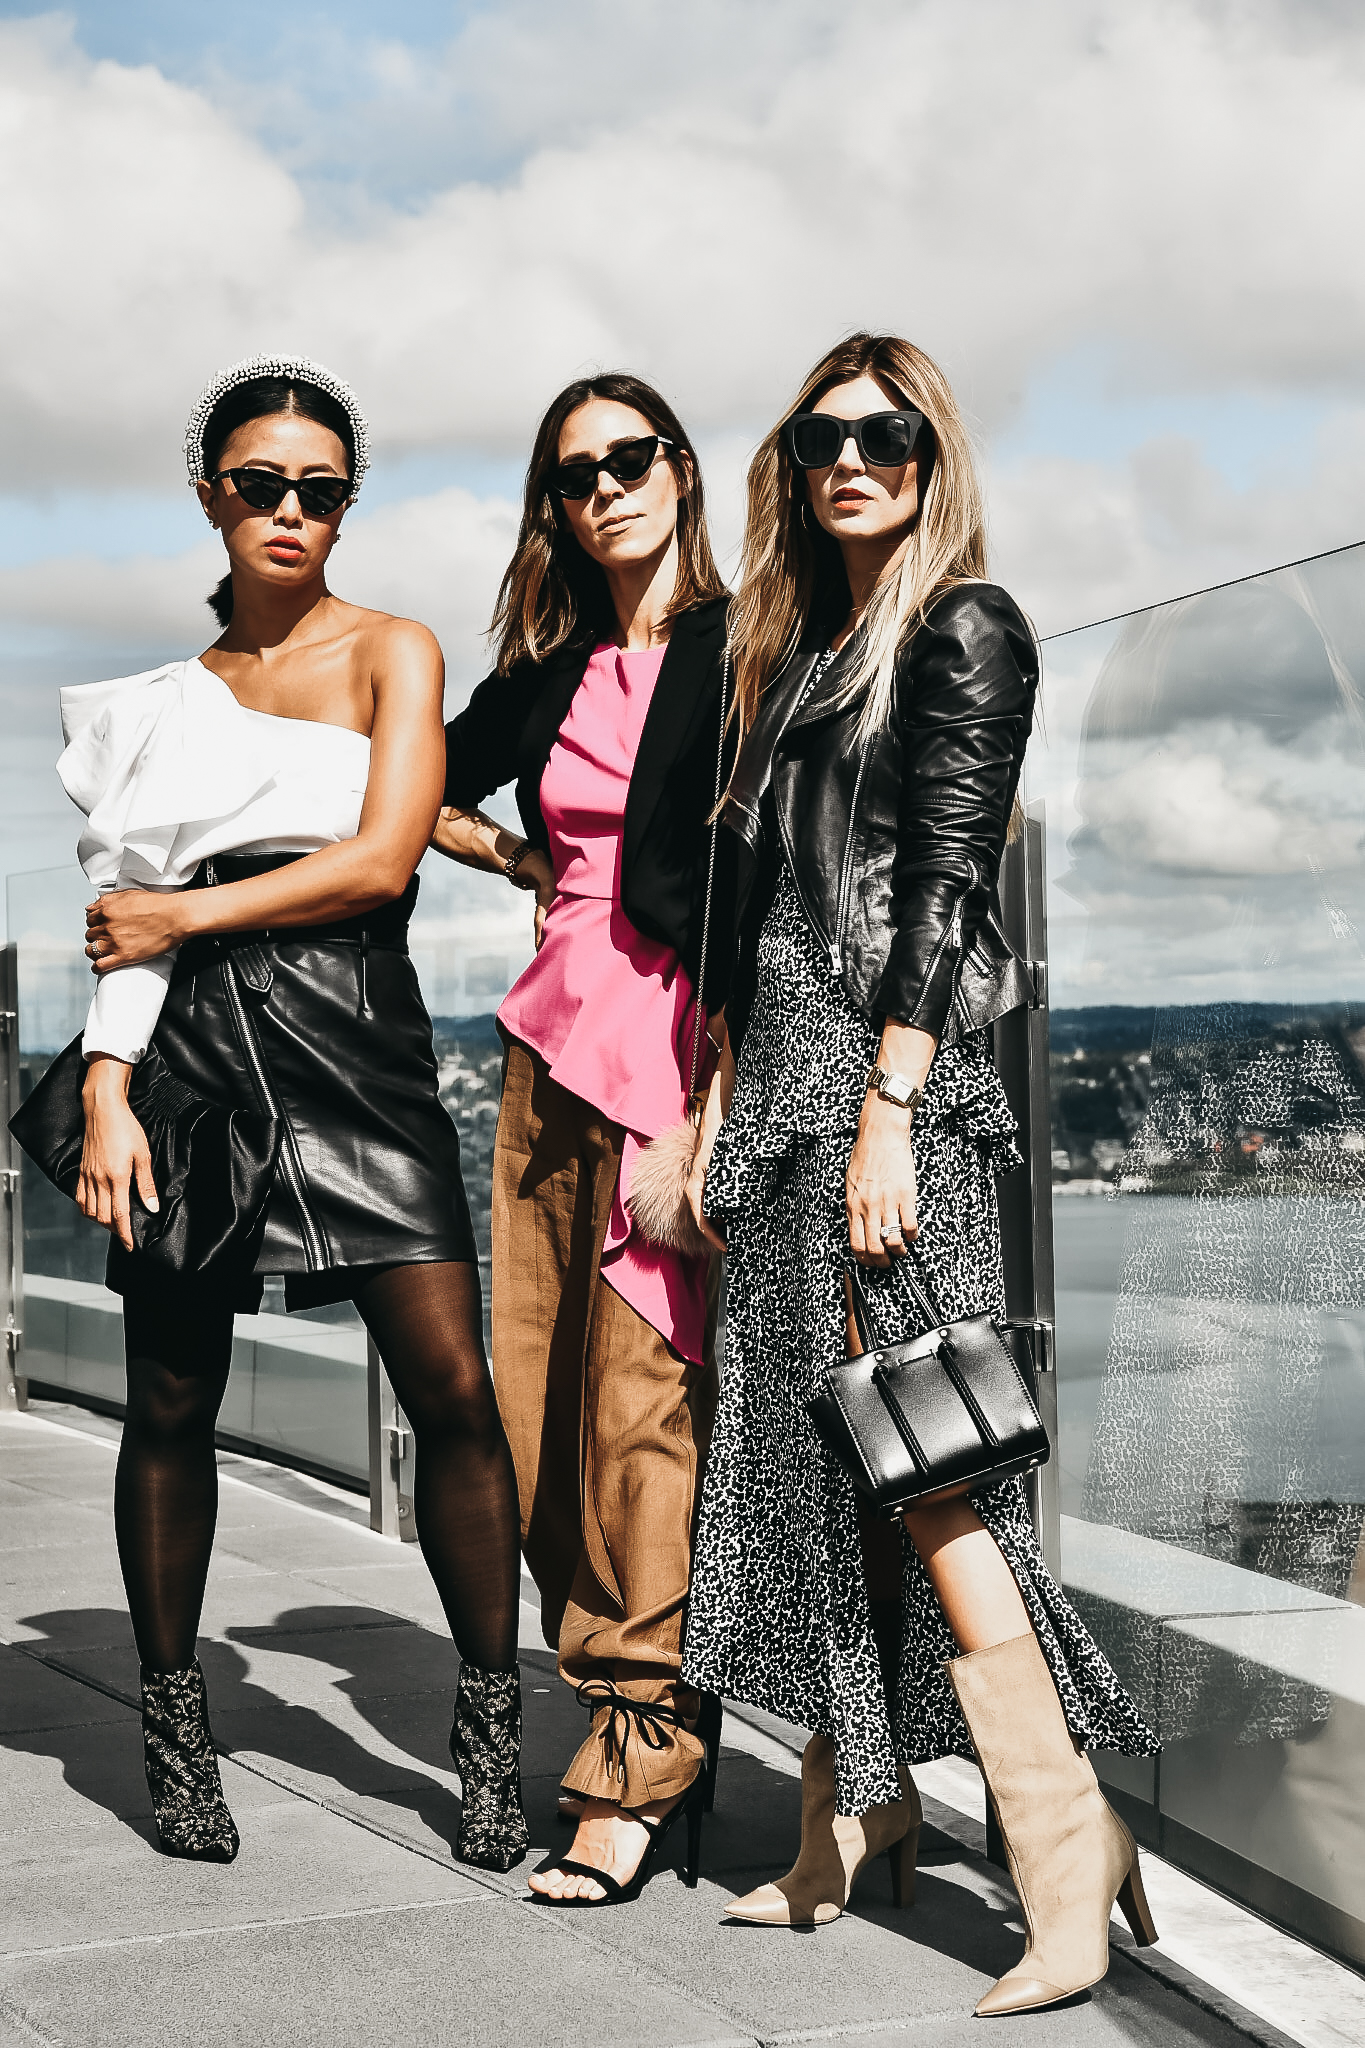 The Grey Edit - Stylelogue - October Trend Story - Seattle Bloggers - Asymmetrical Fashion Three Ways - Seattle Rooftop Views